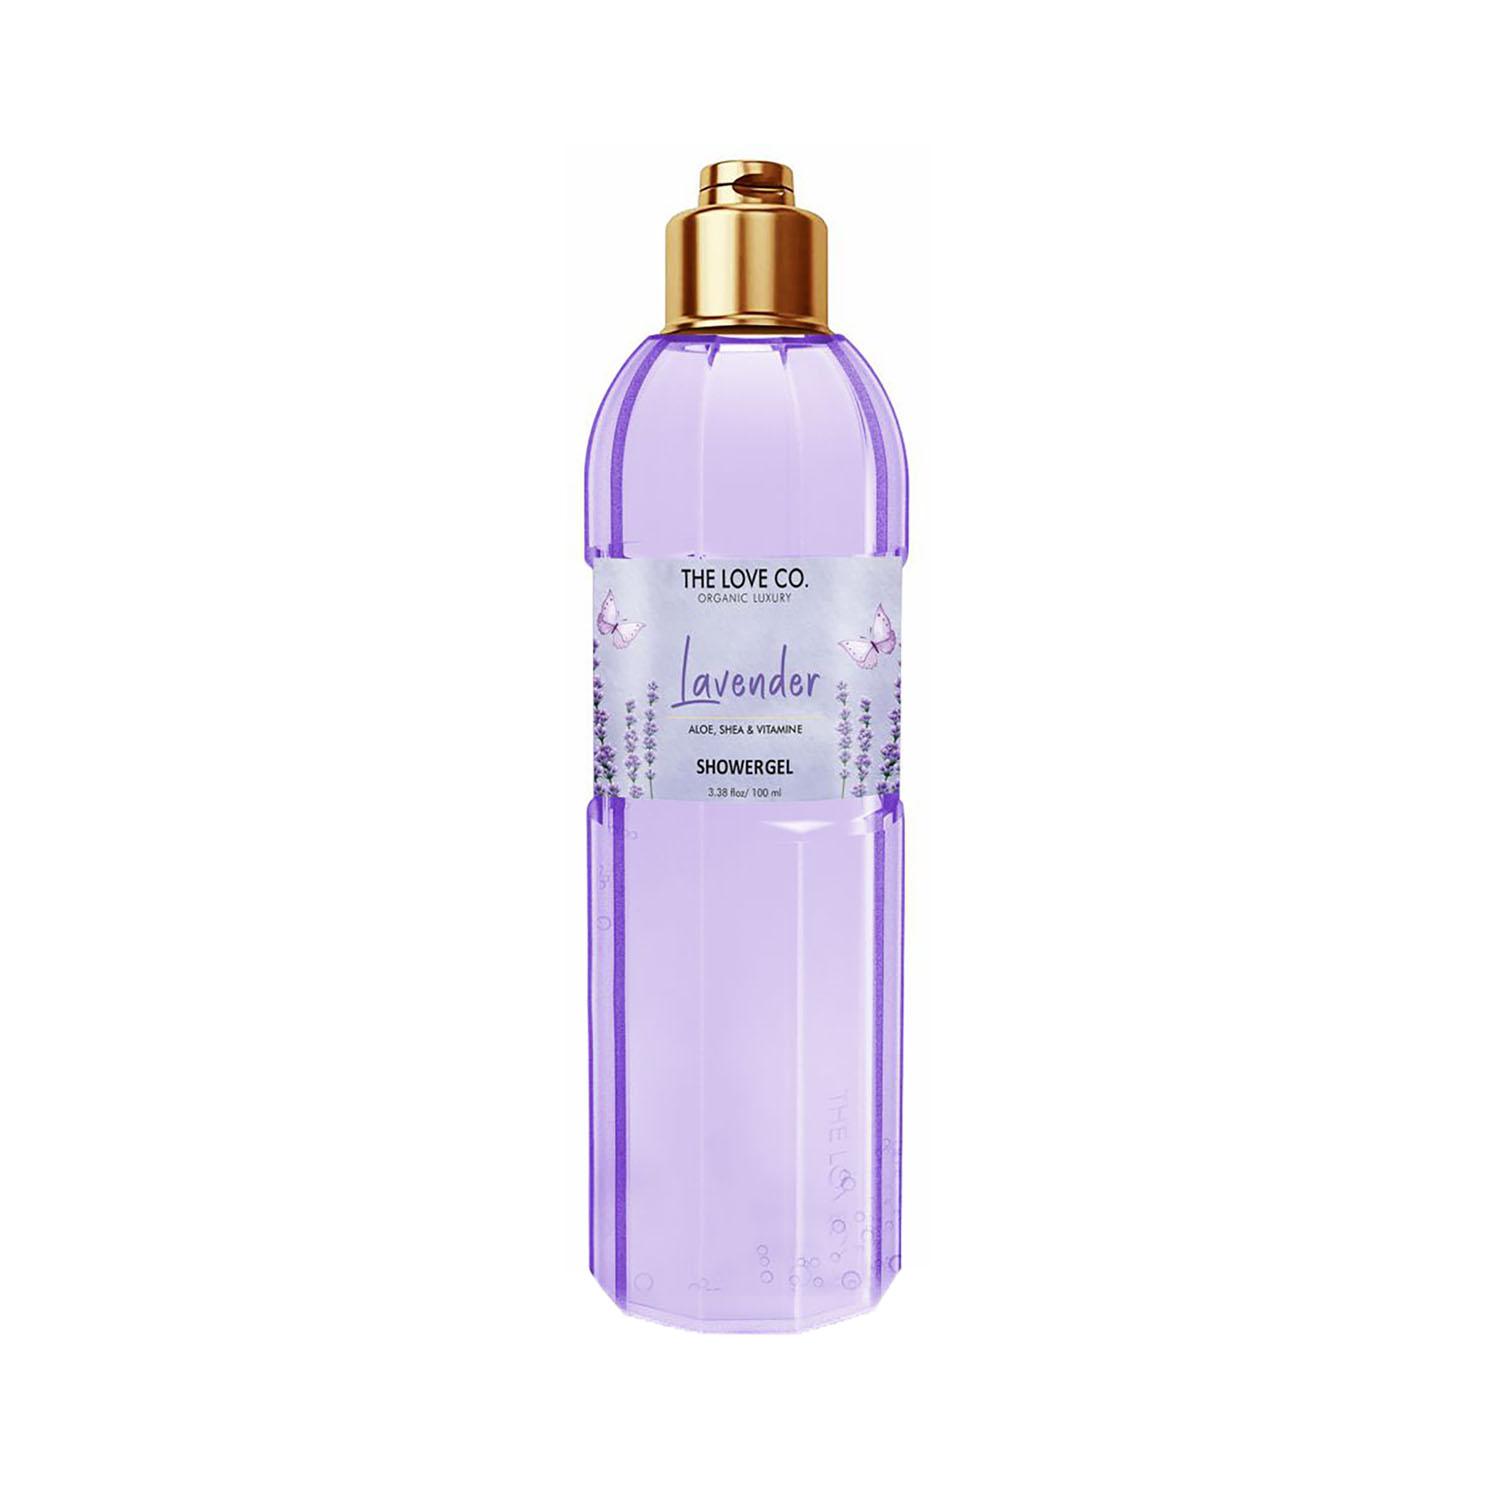 THE LOVE CO. | THE LOVE CO. Lavender Shower Gel (100ml)